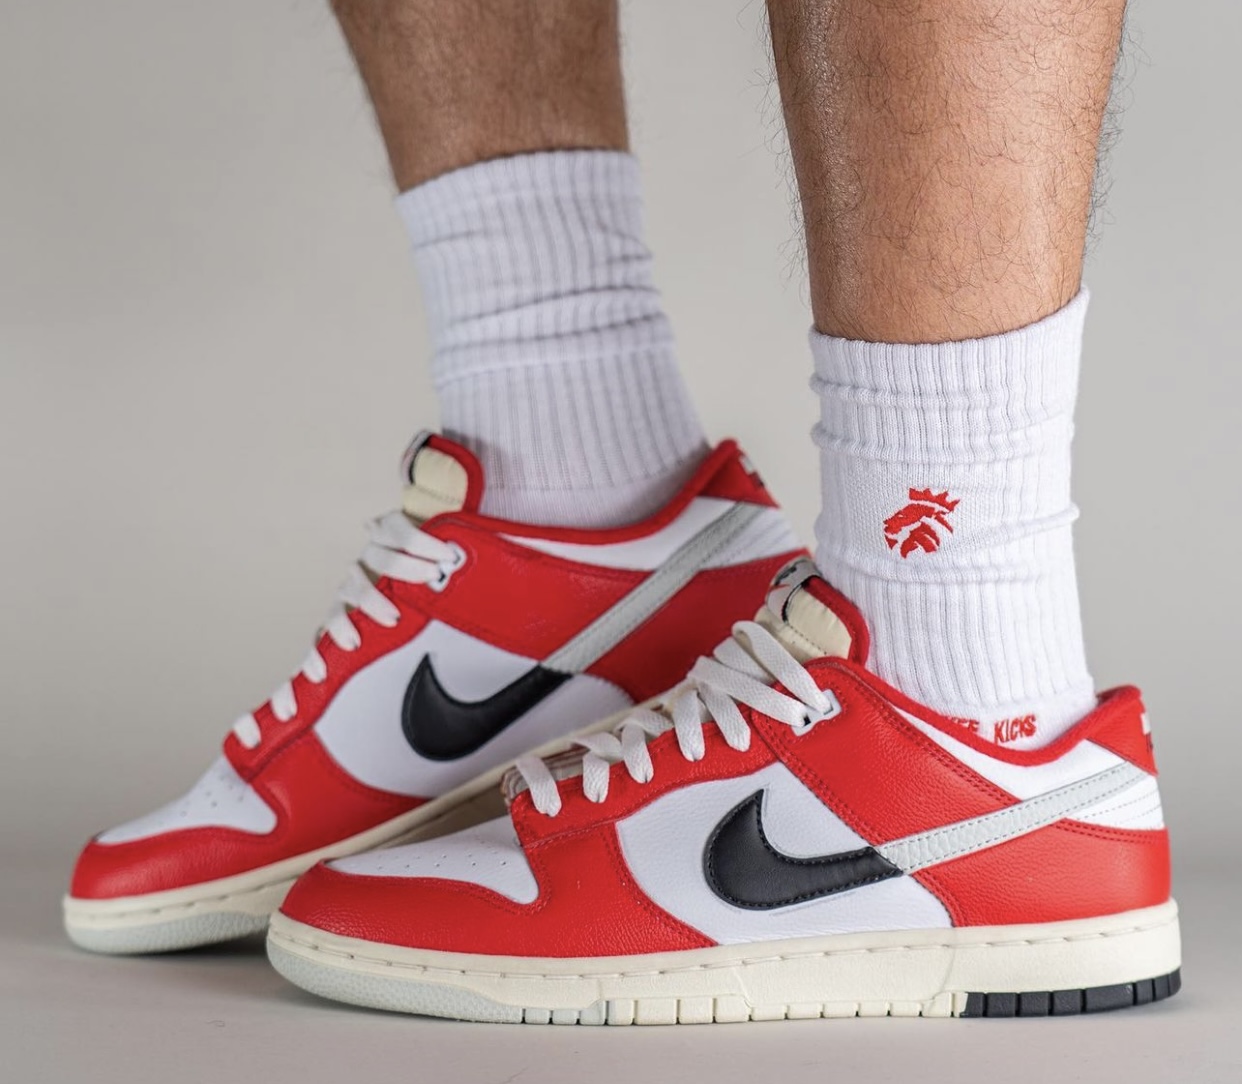 Nike Dunk Low Chicago Split DZ2536-600 Release Date + Where to Buy ...